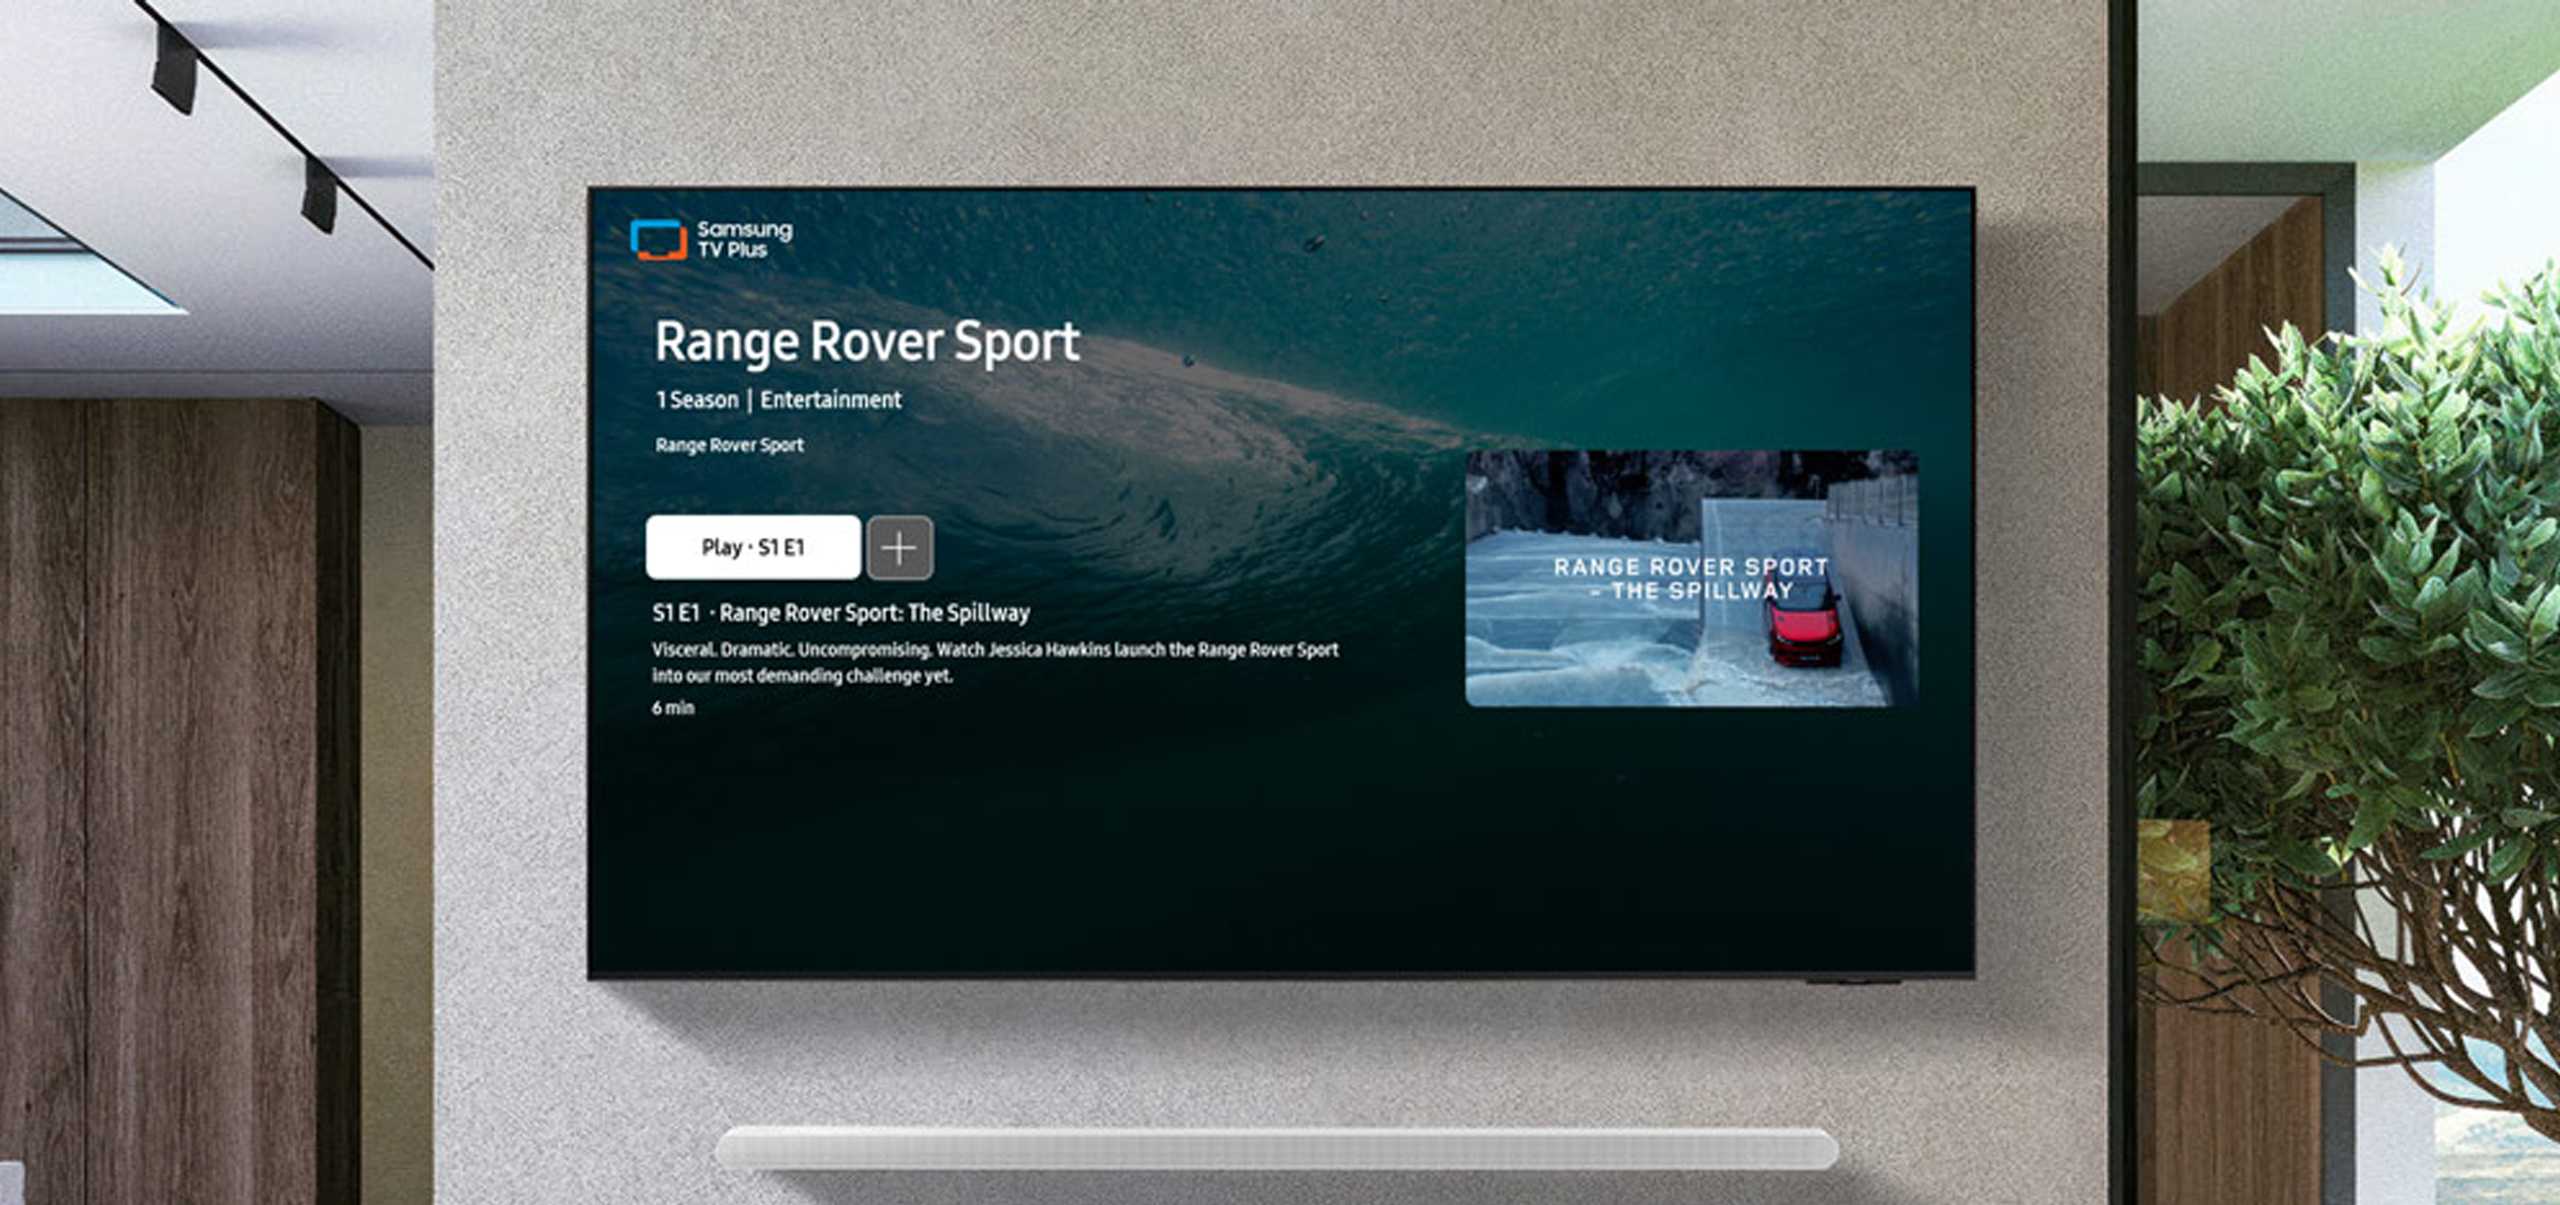 Together launches region’s first Samsung TV branded content destination for Range Rover Sport